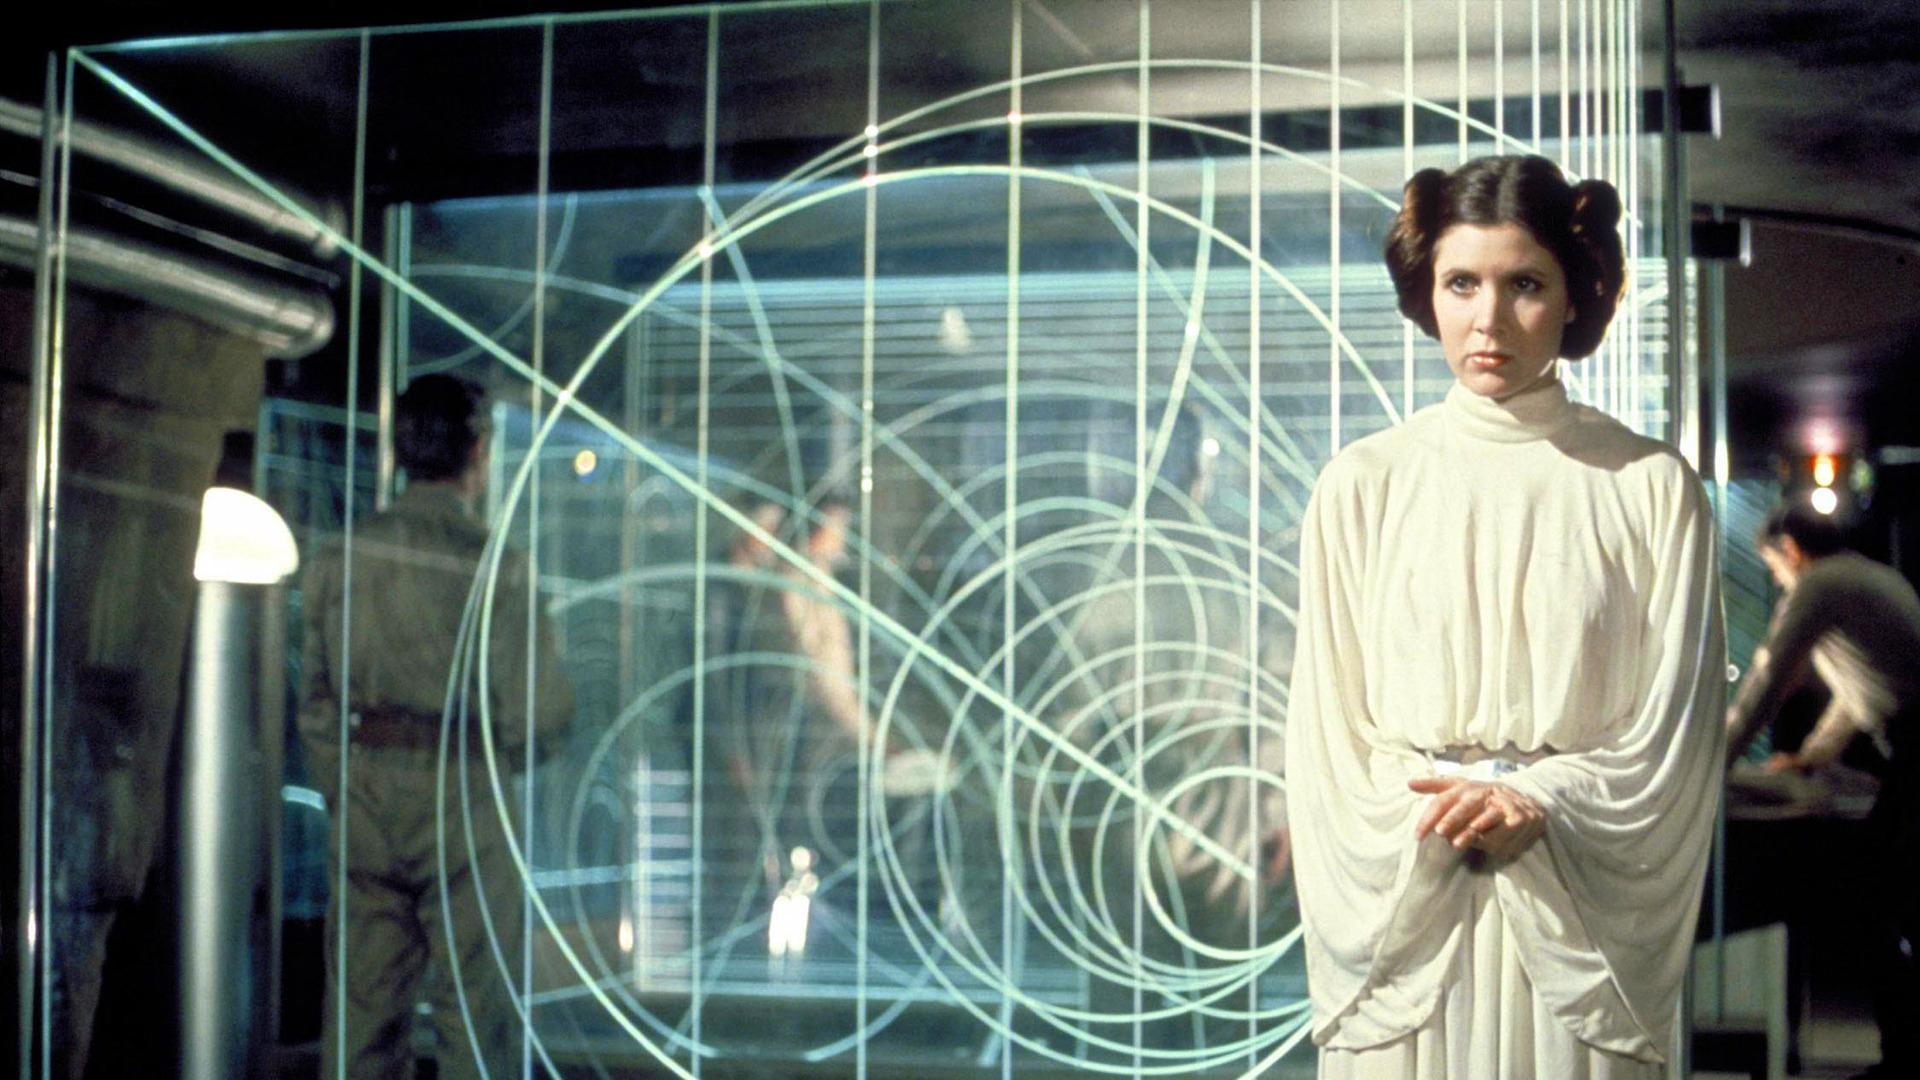 1920x1080 60+ Princess Leia HD Wallpapers and Backgrounds